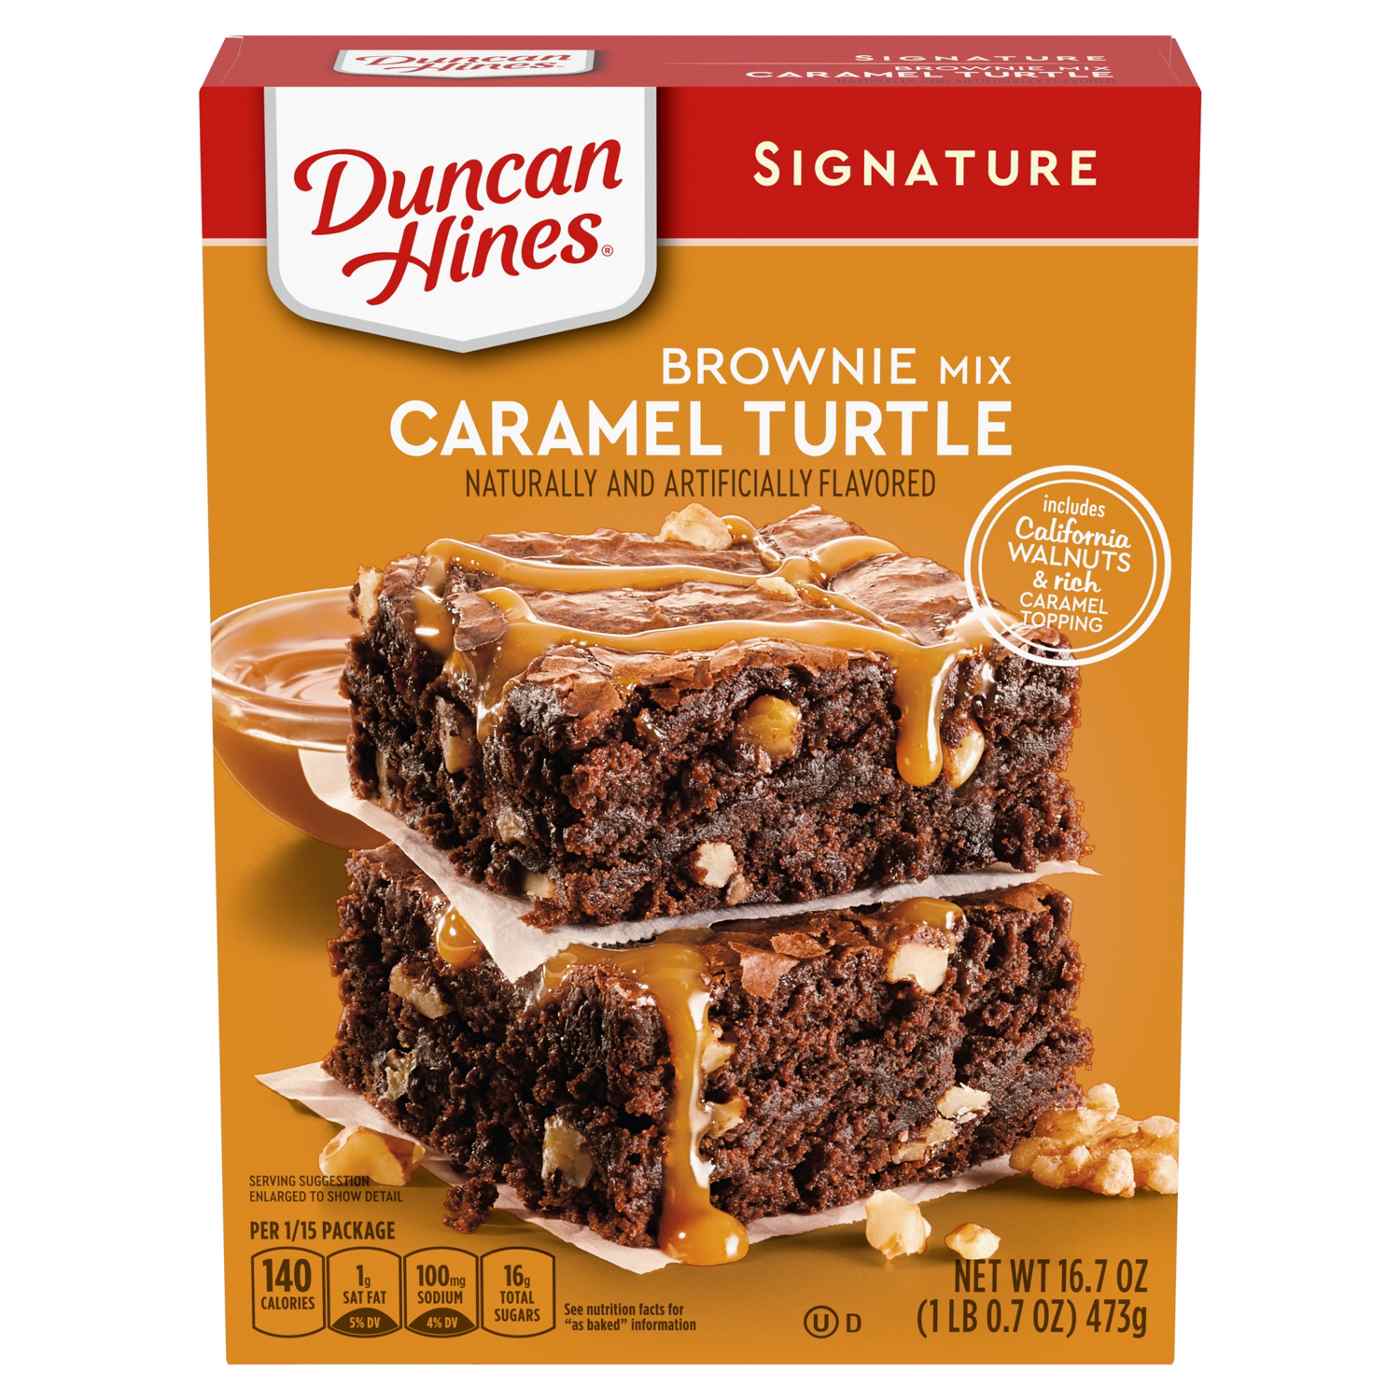 Duncan Hines Signature Caramel Turtle Brownie Mix; image 1 of 7